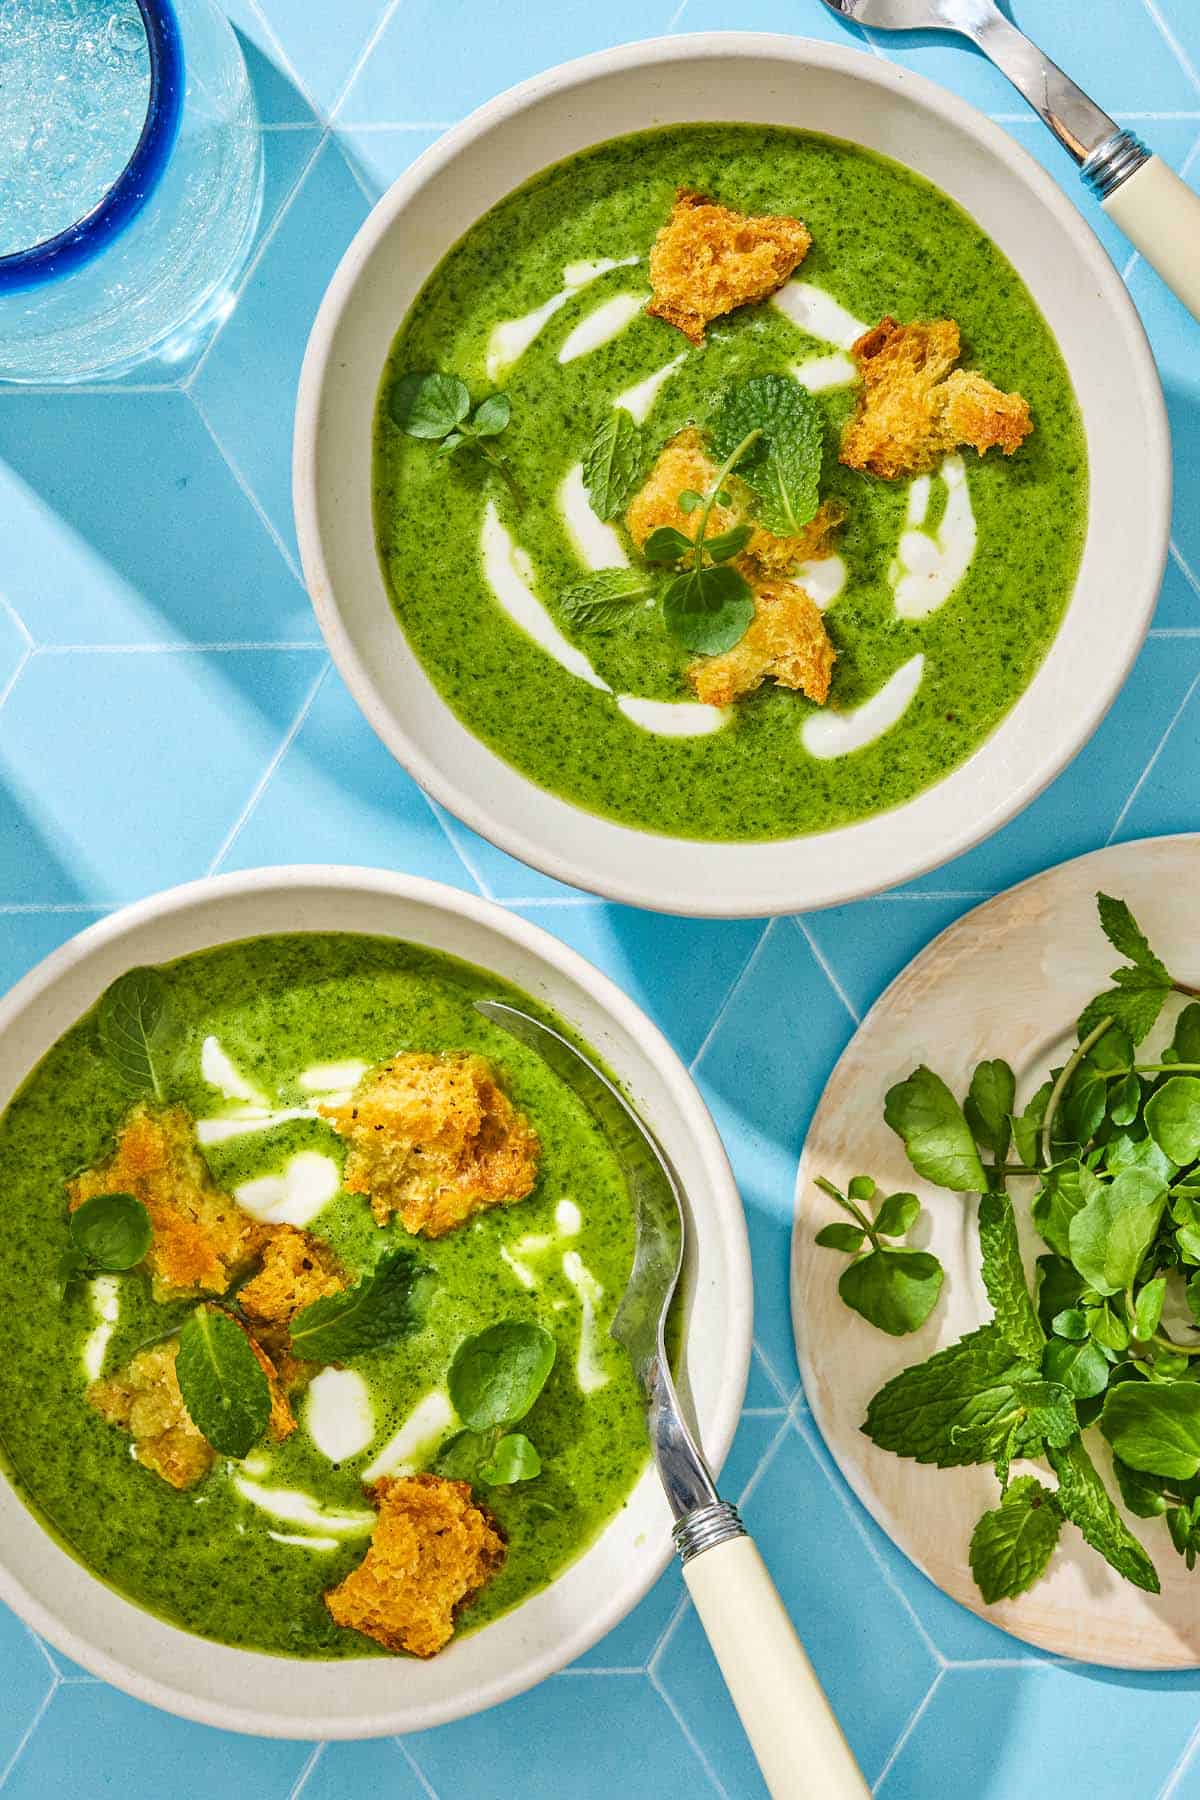 Two bowls of watercress soup with croutons, mint, and a plate with more mint on the side.